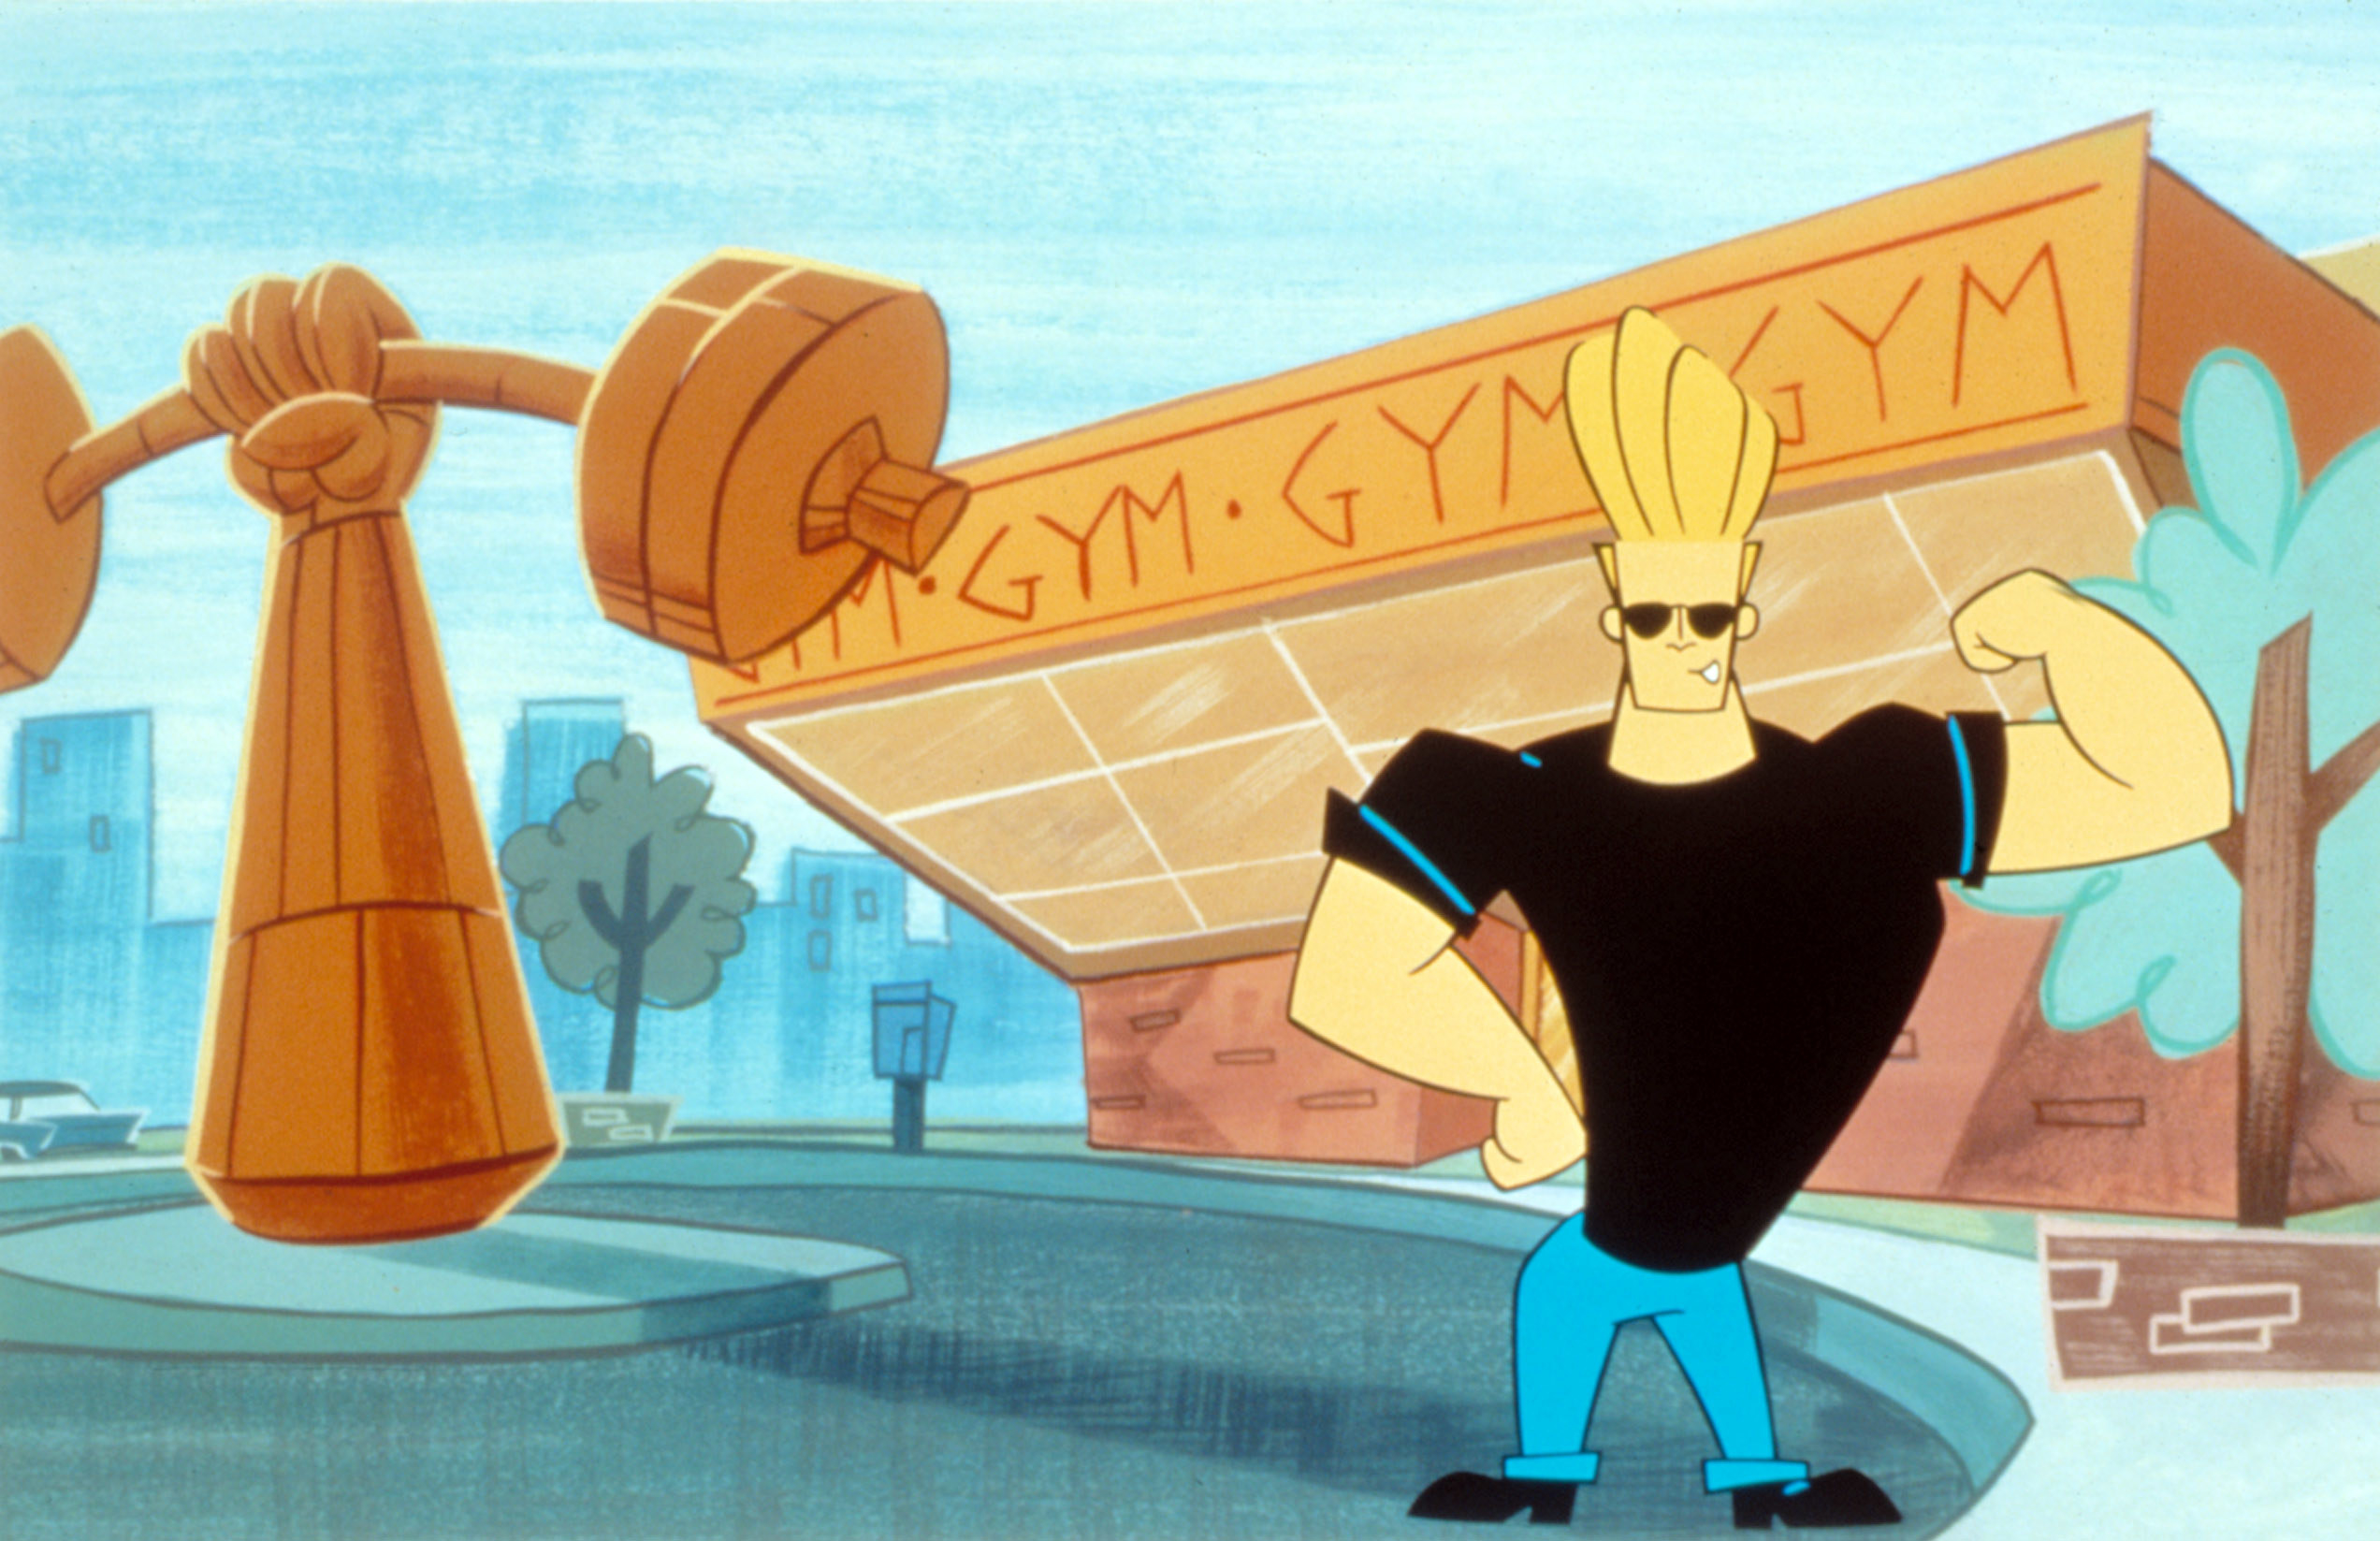 5. "Blond Hair Animated Guy" by Cartoon Network - wide 6